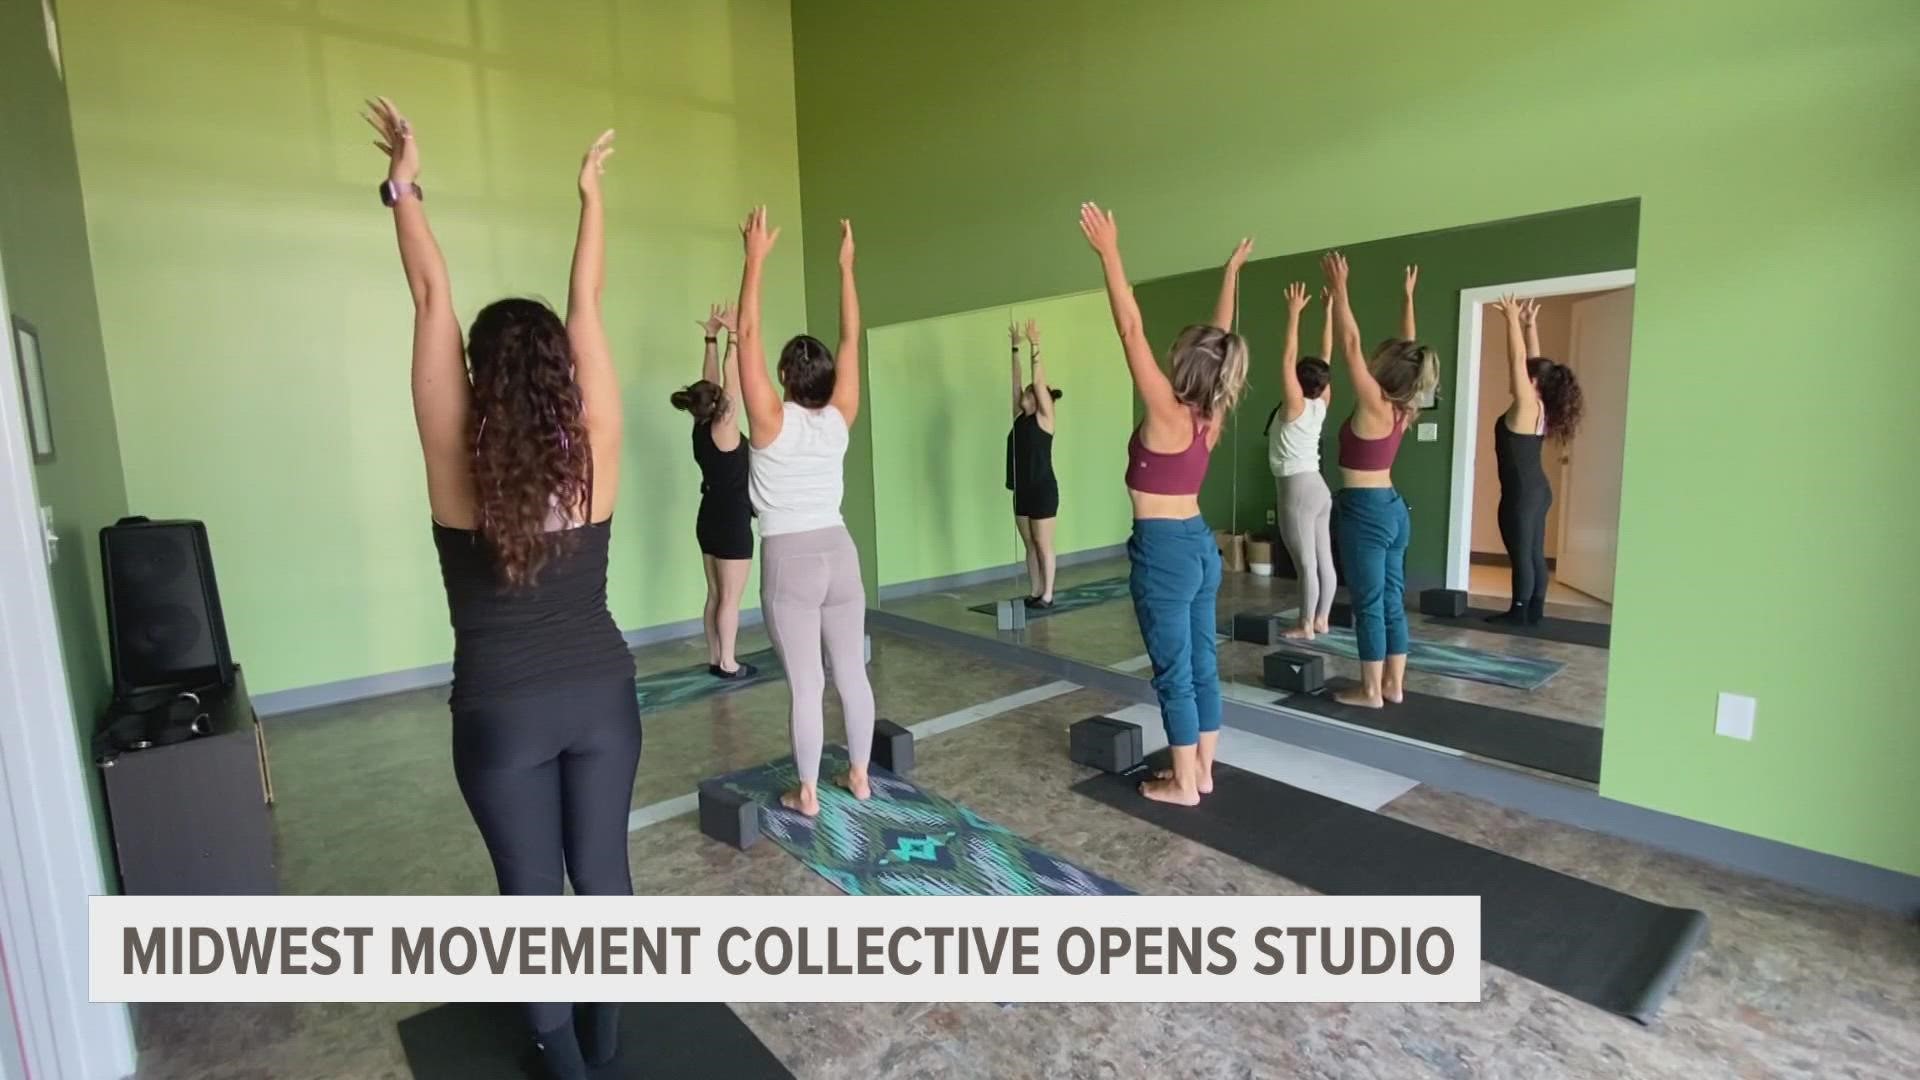 Find out what makes Midwest Movement Collective unique and why members think you should give it a try.